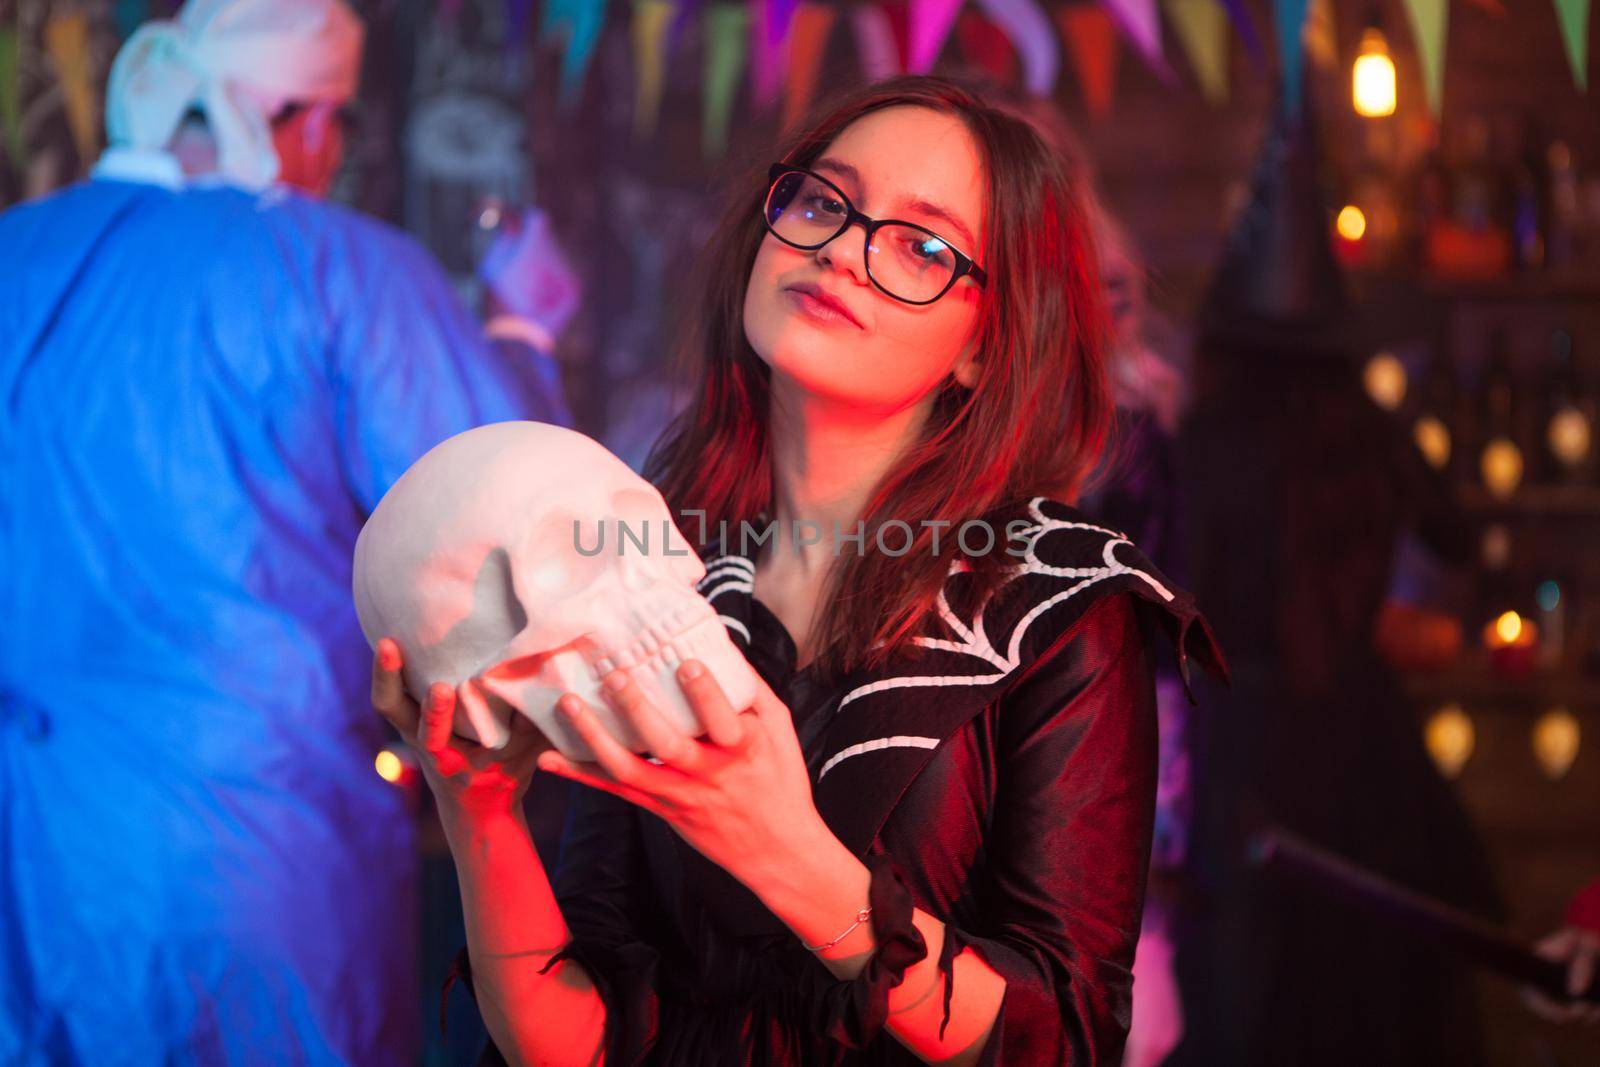 Pretty little girl dressed up like a witch holding a human skull at halloween party. Creepy man dressed up like a doctor in the background.